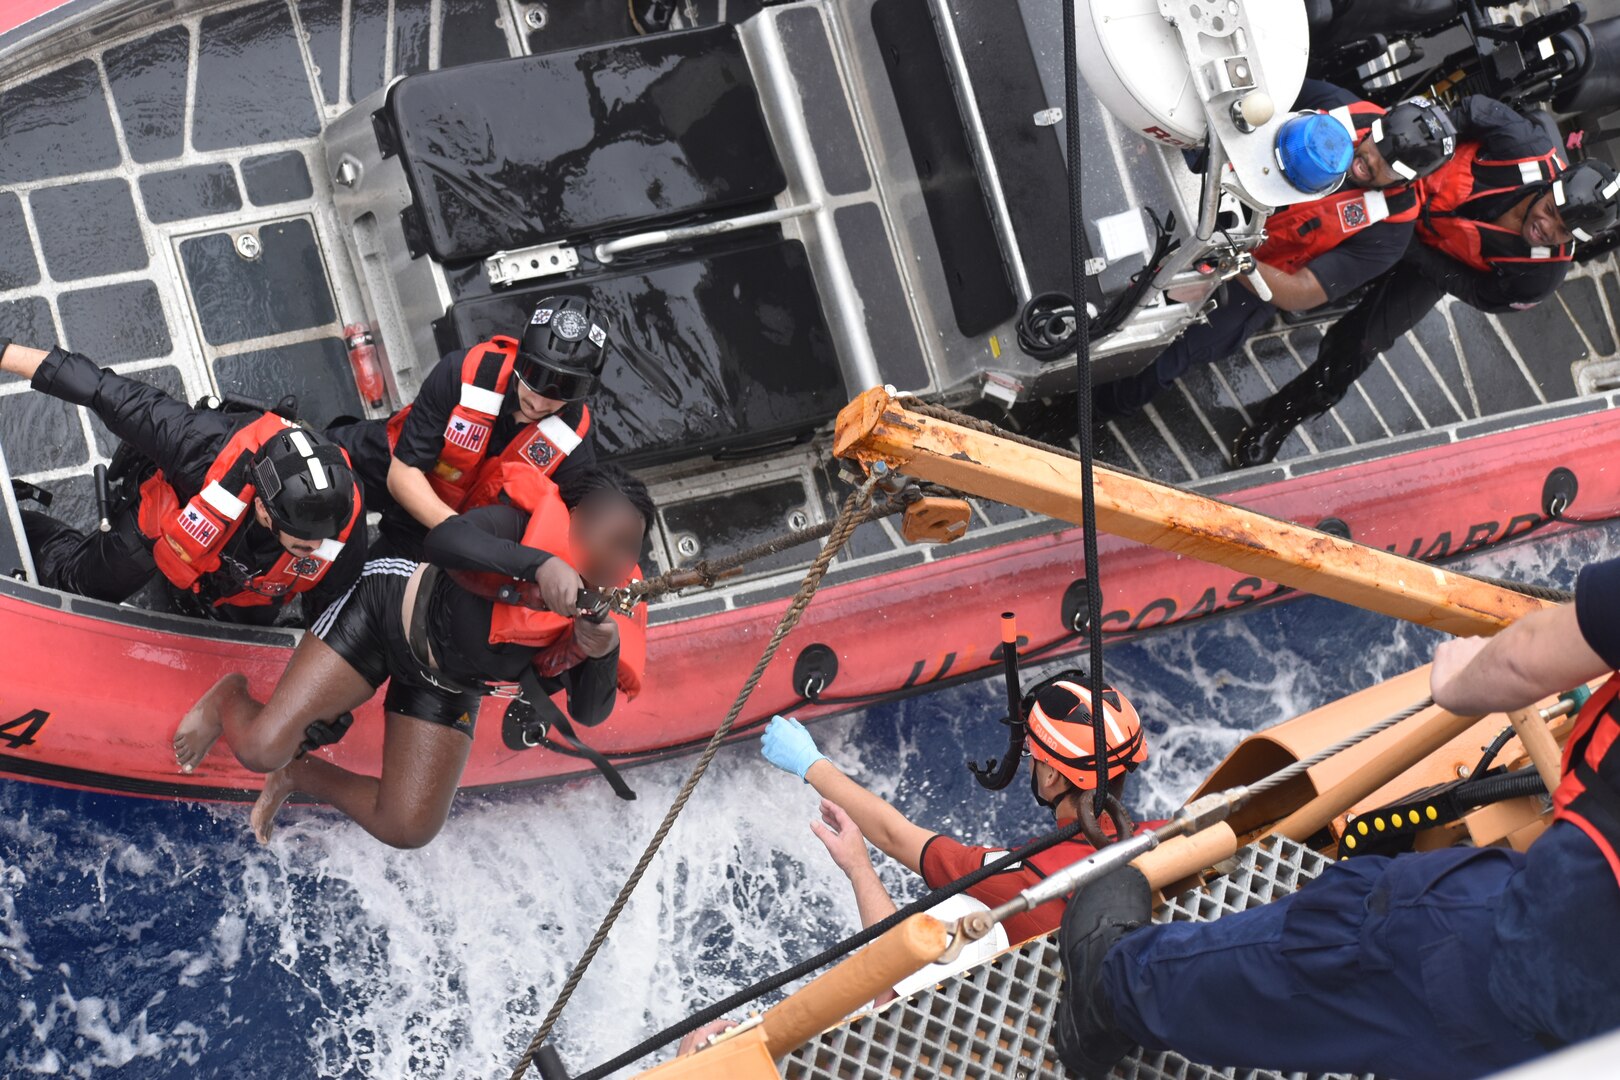 A Coast Guard Cutter Dependable (WMEC 626) small boat crew transfers a Haitian child to the cutter during a search and rescue mission in heavy seas, which resulted in the successful rescue of all 33 aboard a sinking vessel 6 miles off Haiti’s coast, Jan. 22, 2024. Dependable’s crew patrolled the Coast Guard Seventh District’s area of operations during a two-month deployment to conduct maritime law enforcement missions. (U.S. Coast Guard photo)